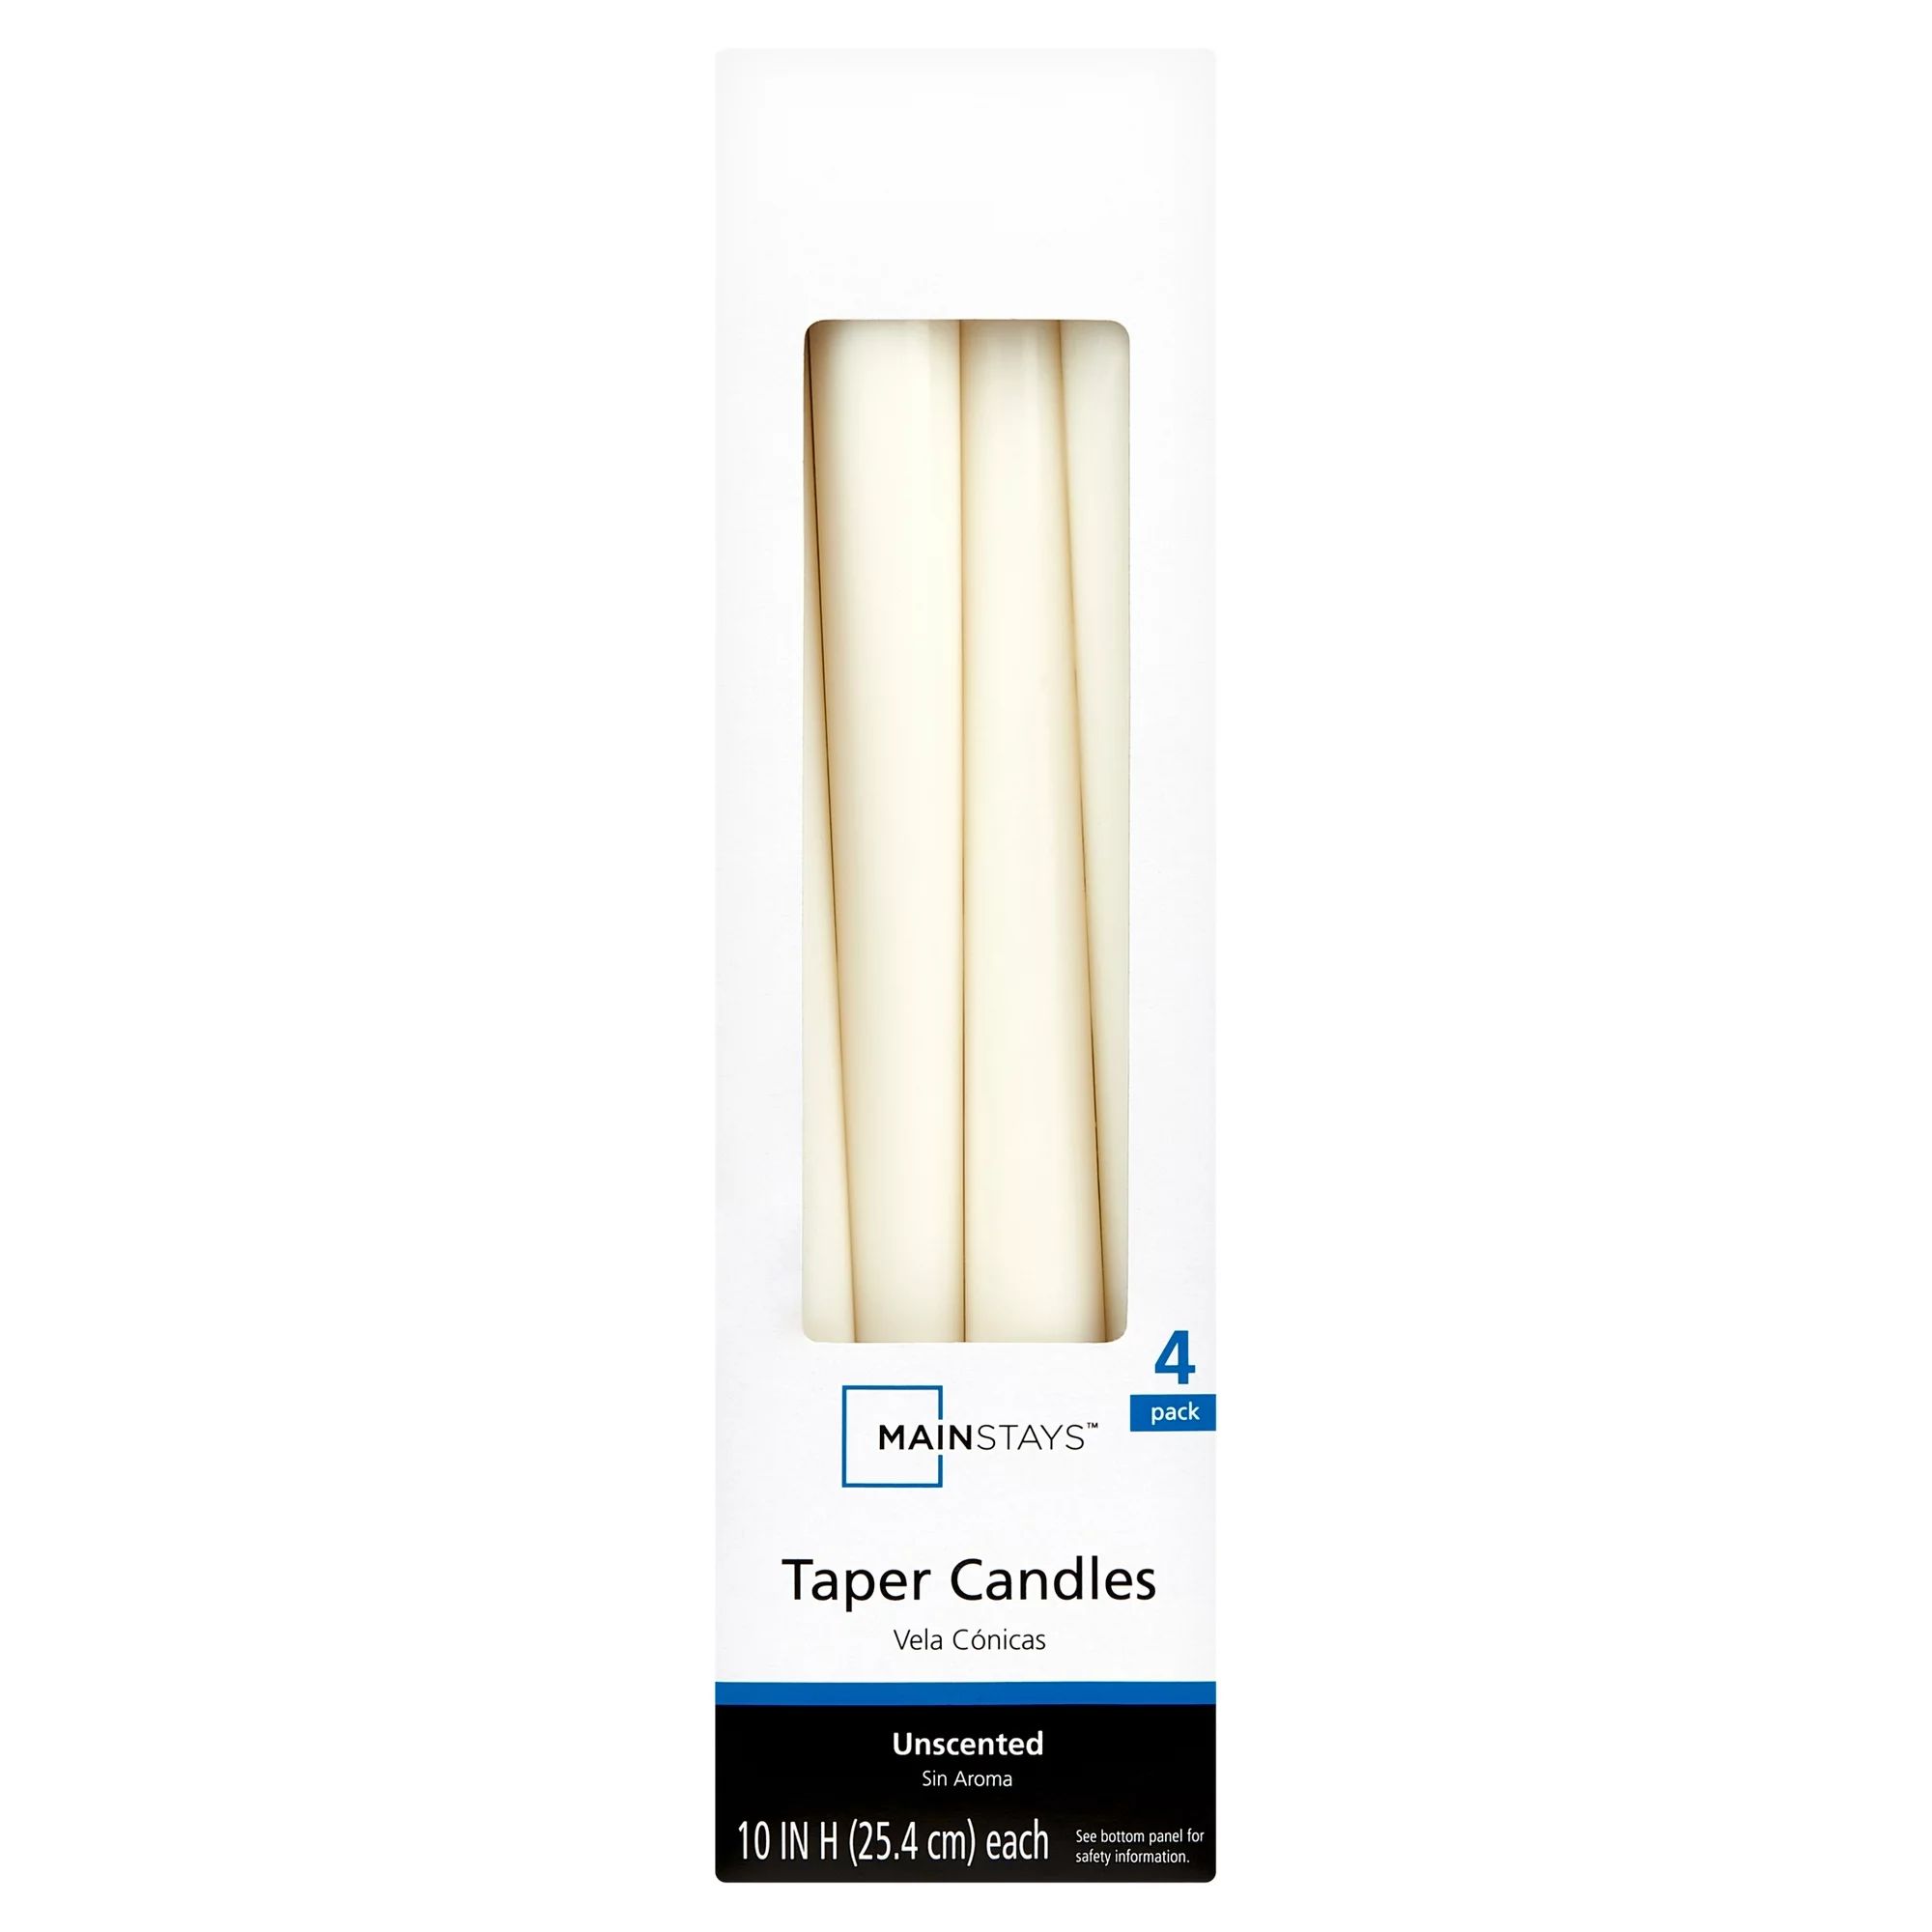 Mainstays Unscented Taper Candle, Ivory, 4-Pack, 10 inches Long | Walmart (US)